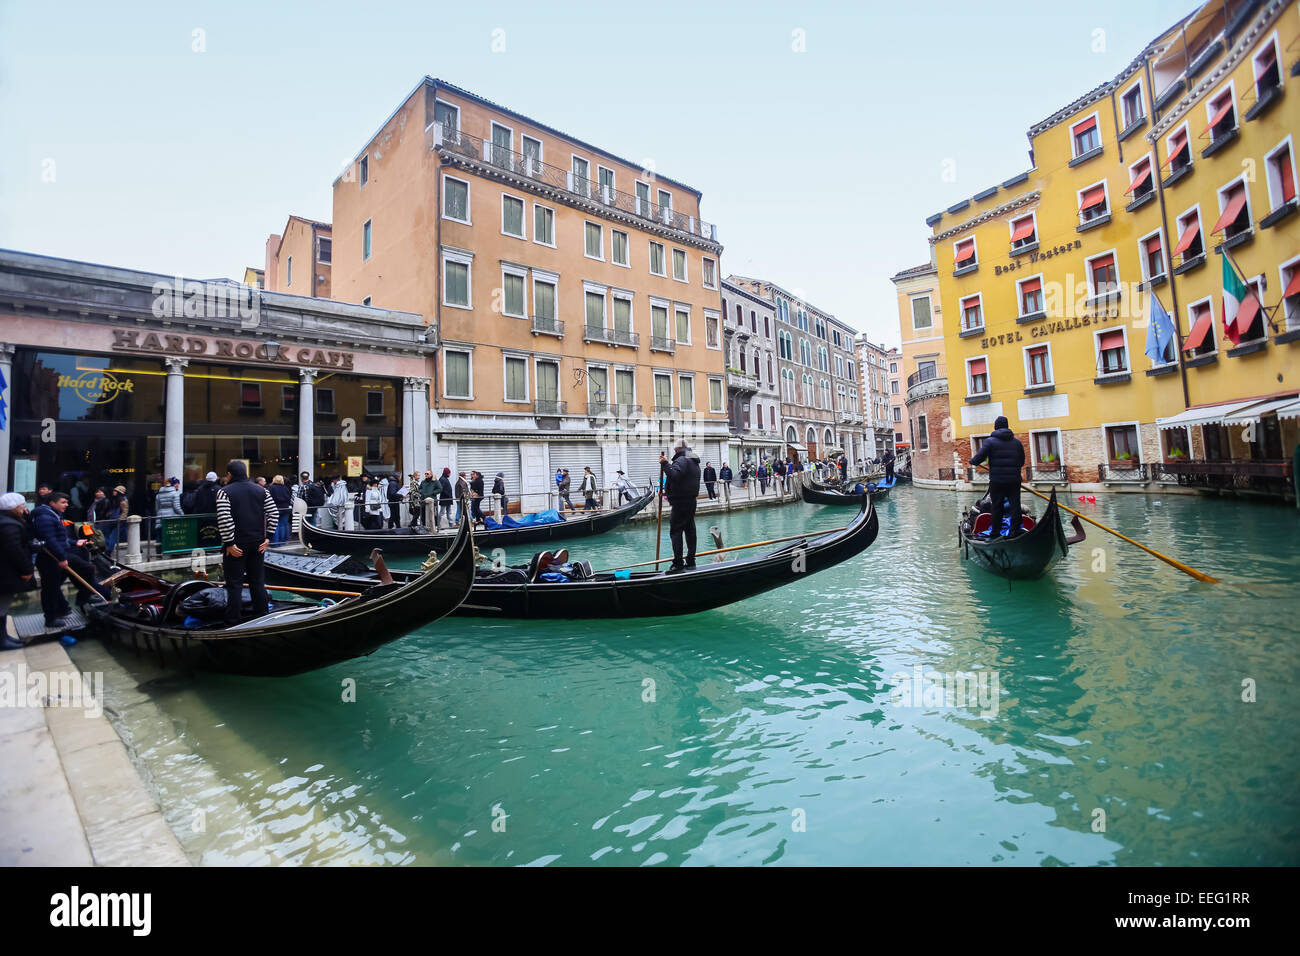 Tourists and gondolas at a gondola station next to Hard rock cafe and Hotel Cavalletto in Venice, Italy. Stock Photo